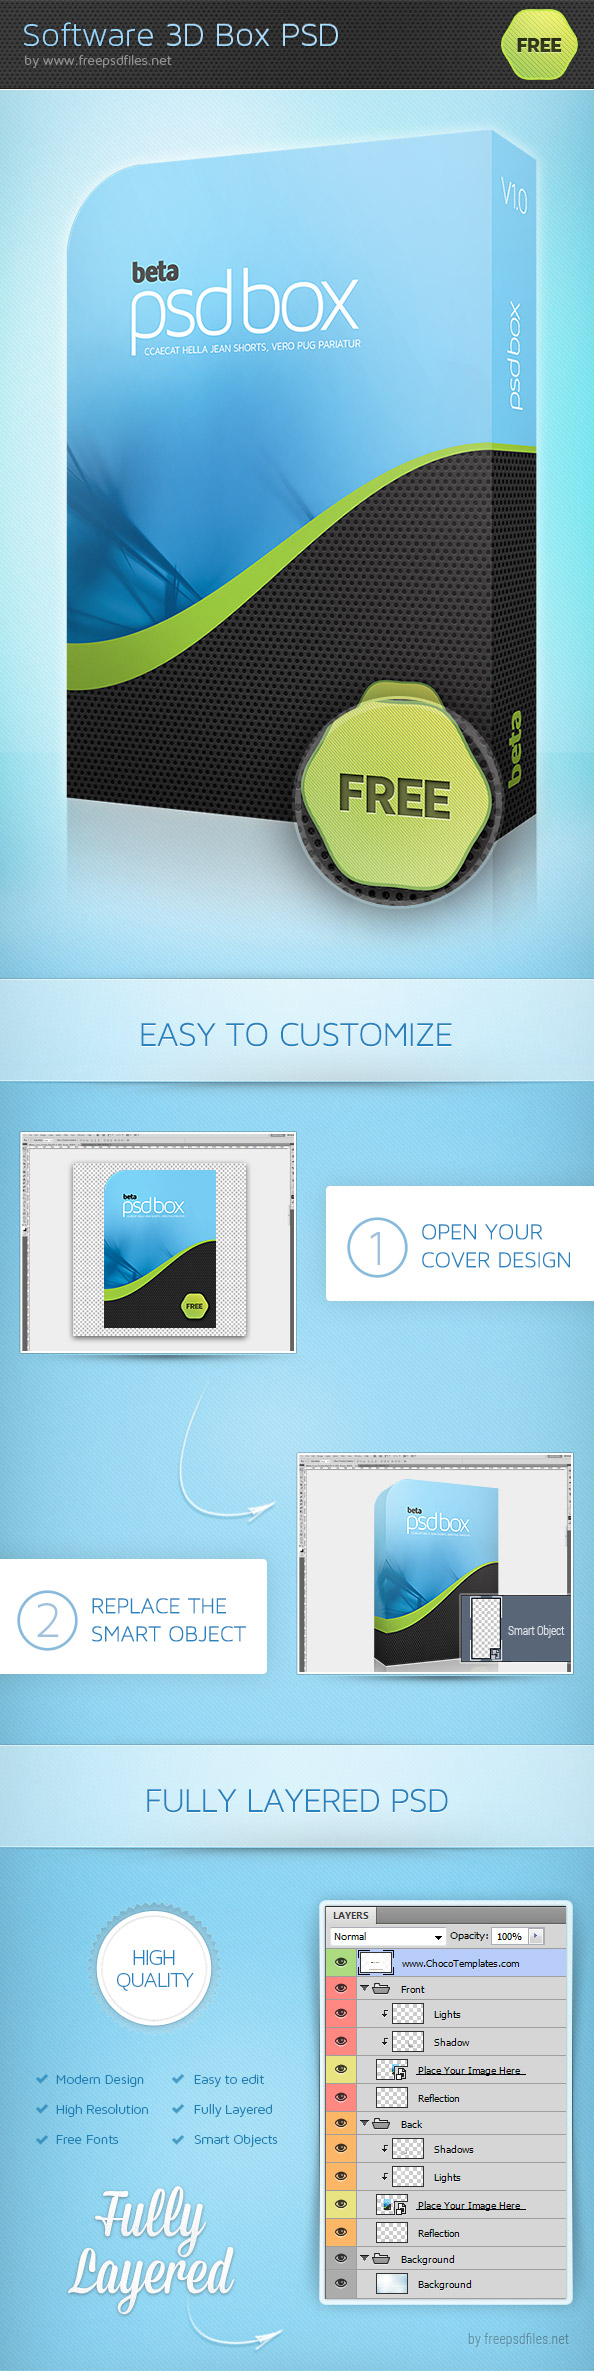 Software 3D Box PSD Template Preview